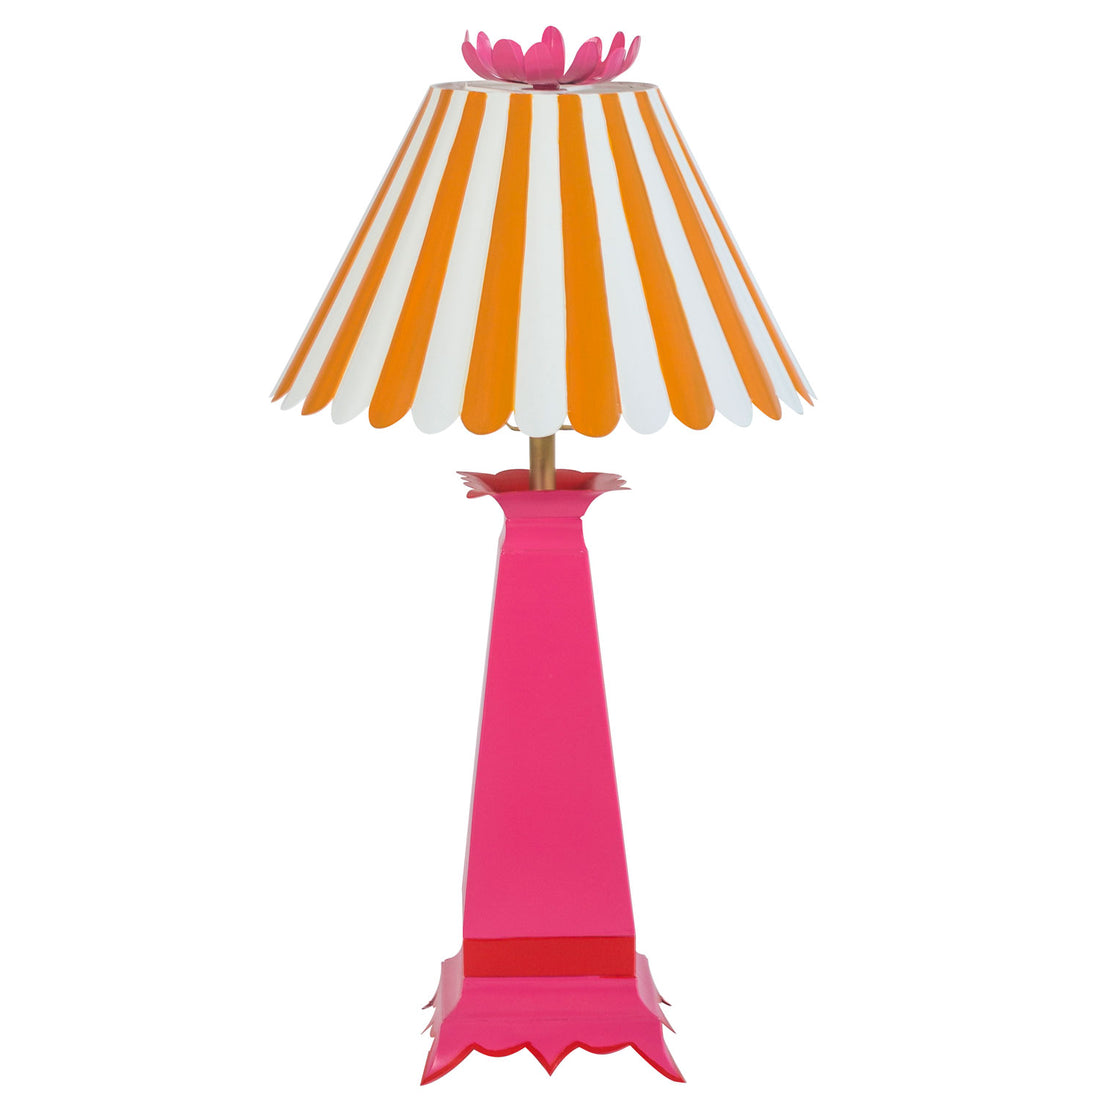 Norma tole lamp with stripey shade in pink and orange, flower finial